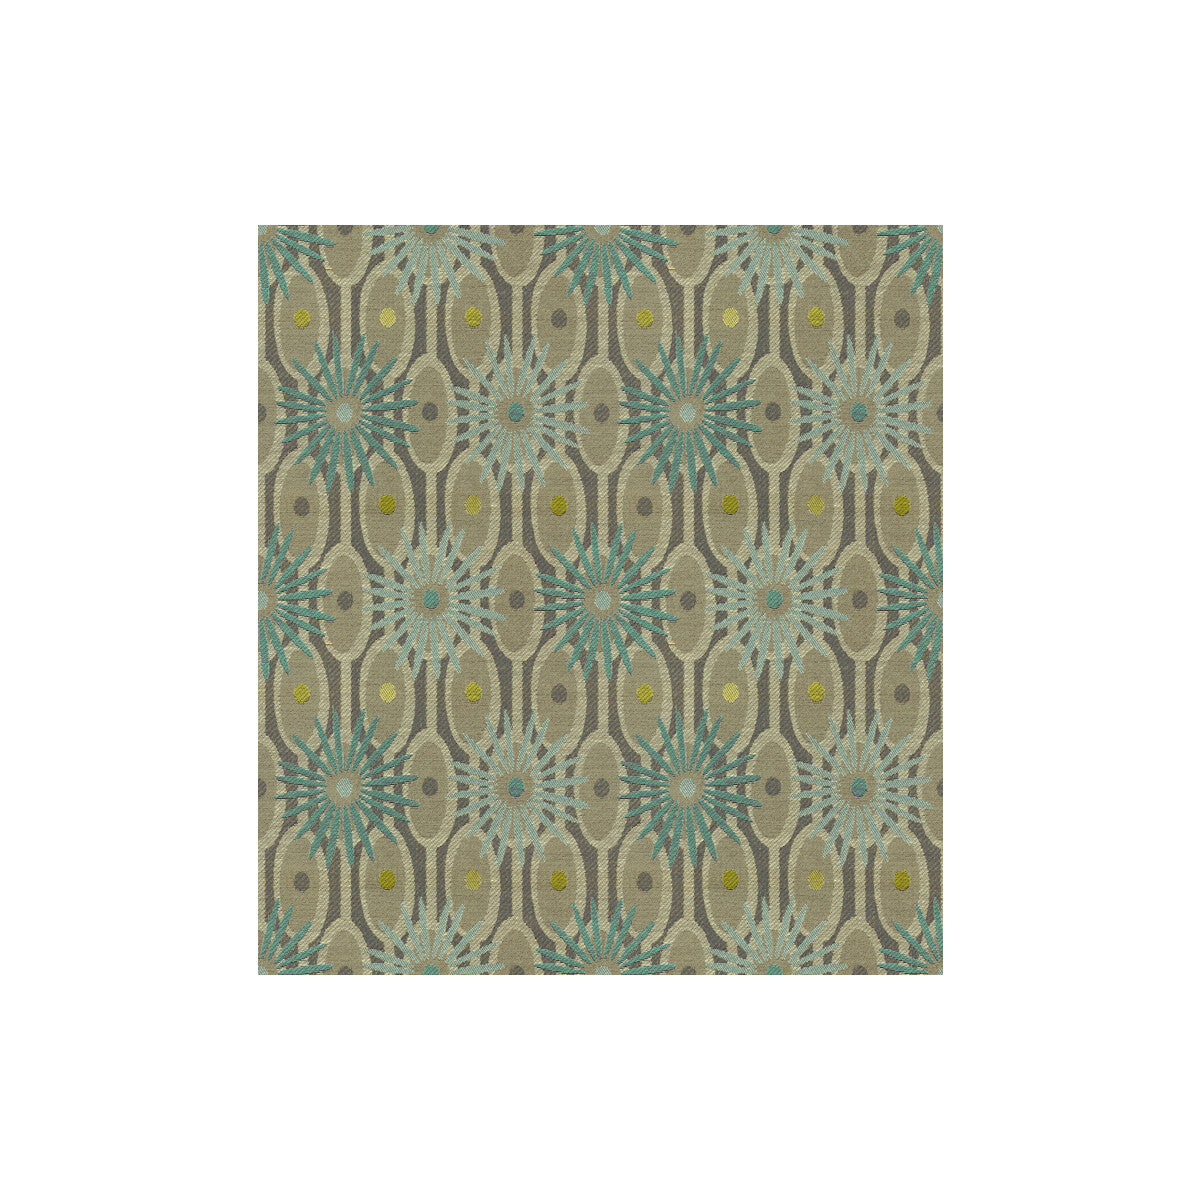 Burst Out fabric in capri color - pattern 32894.511.0 - by Kravet Contract in the Contract Gis collection